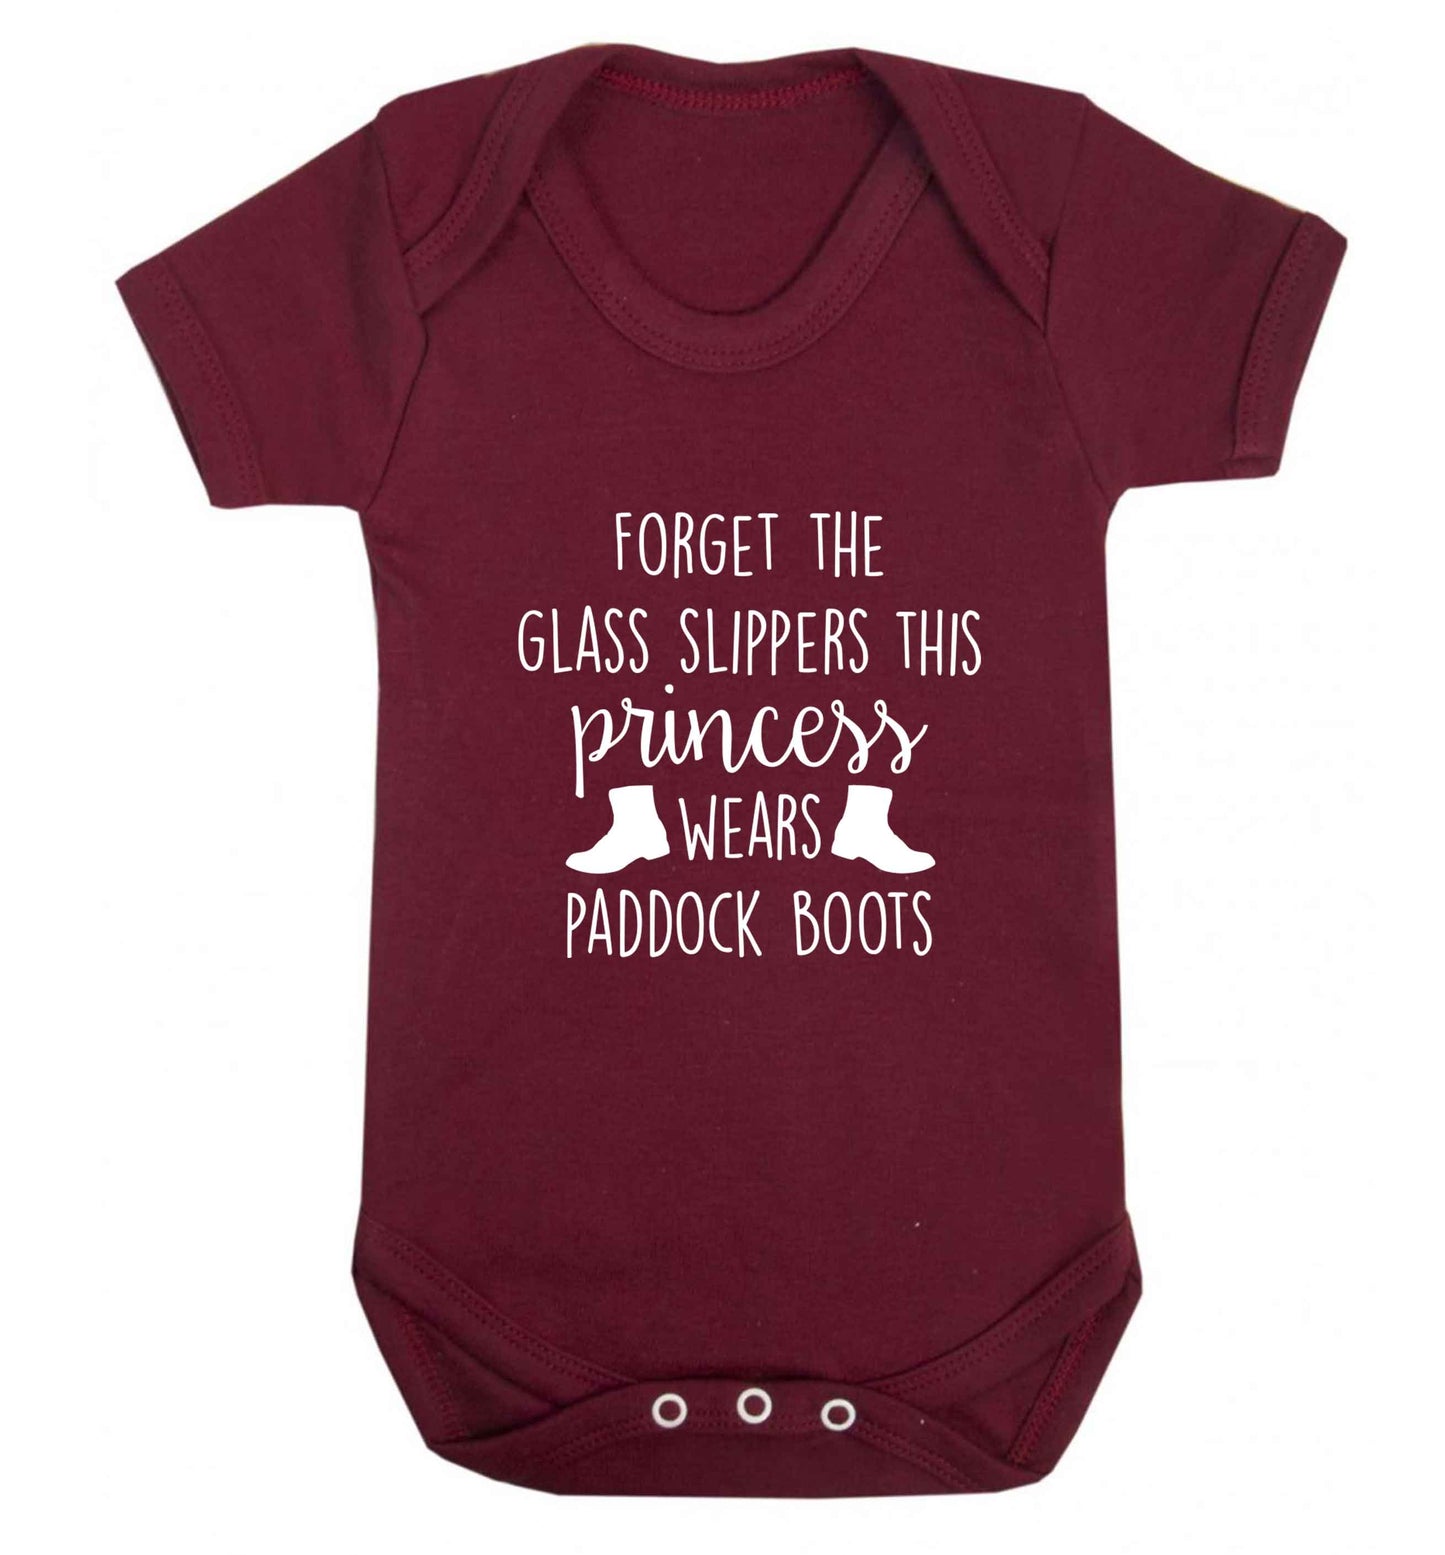 Forget the glass slippers this princess wears paddock boots baby vest maroon 18-24 months